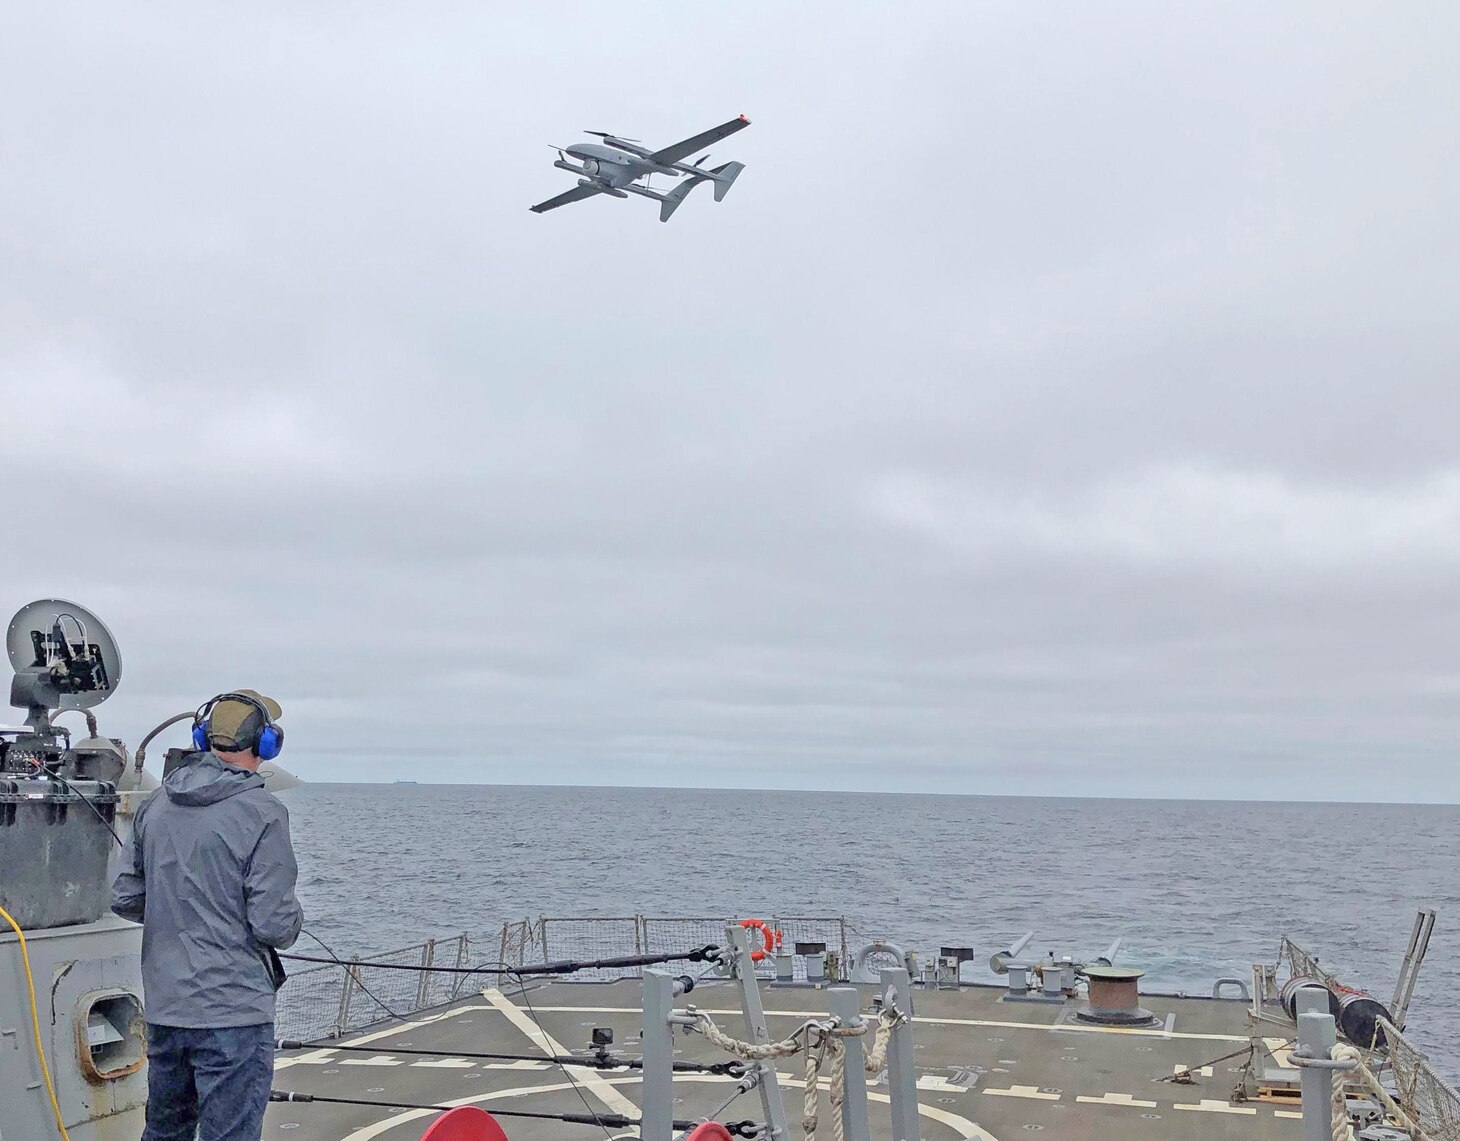 The Navy conducts a demonstration aboard USS Paul Hamilton (DDG-60) July 12 to identify and examine Unmanned Air Systems (UAS) capable of wide-area missions from a Navy vessel at long ranges for extended periods while sending information back to the vessel.